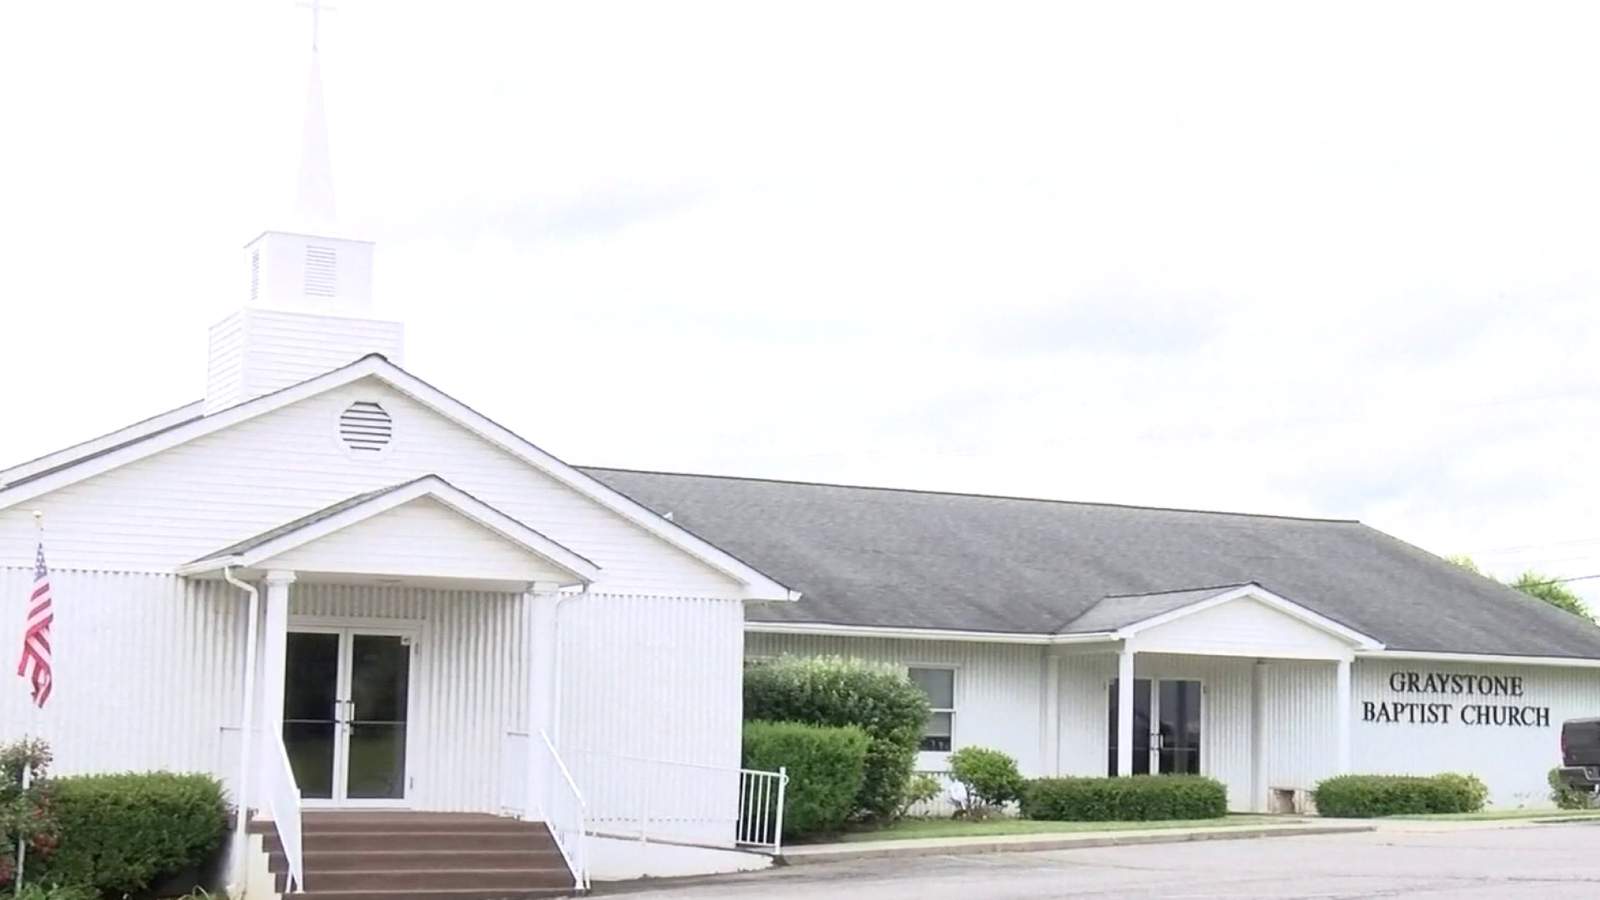 33 cases of coronavirus linked to church in Greenbrier County, West Virginia